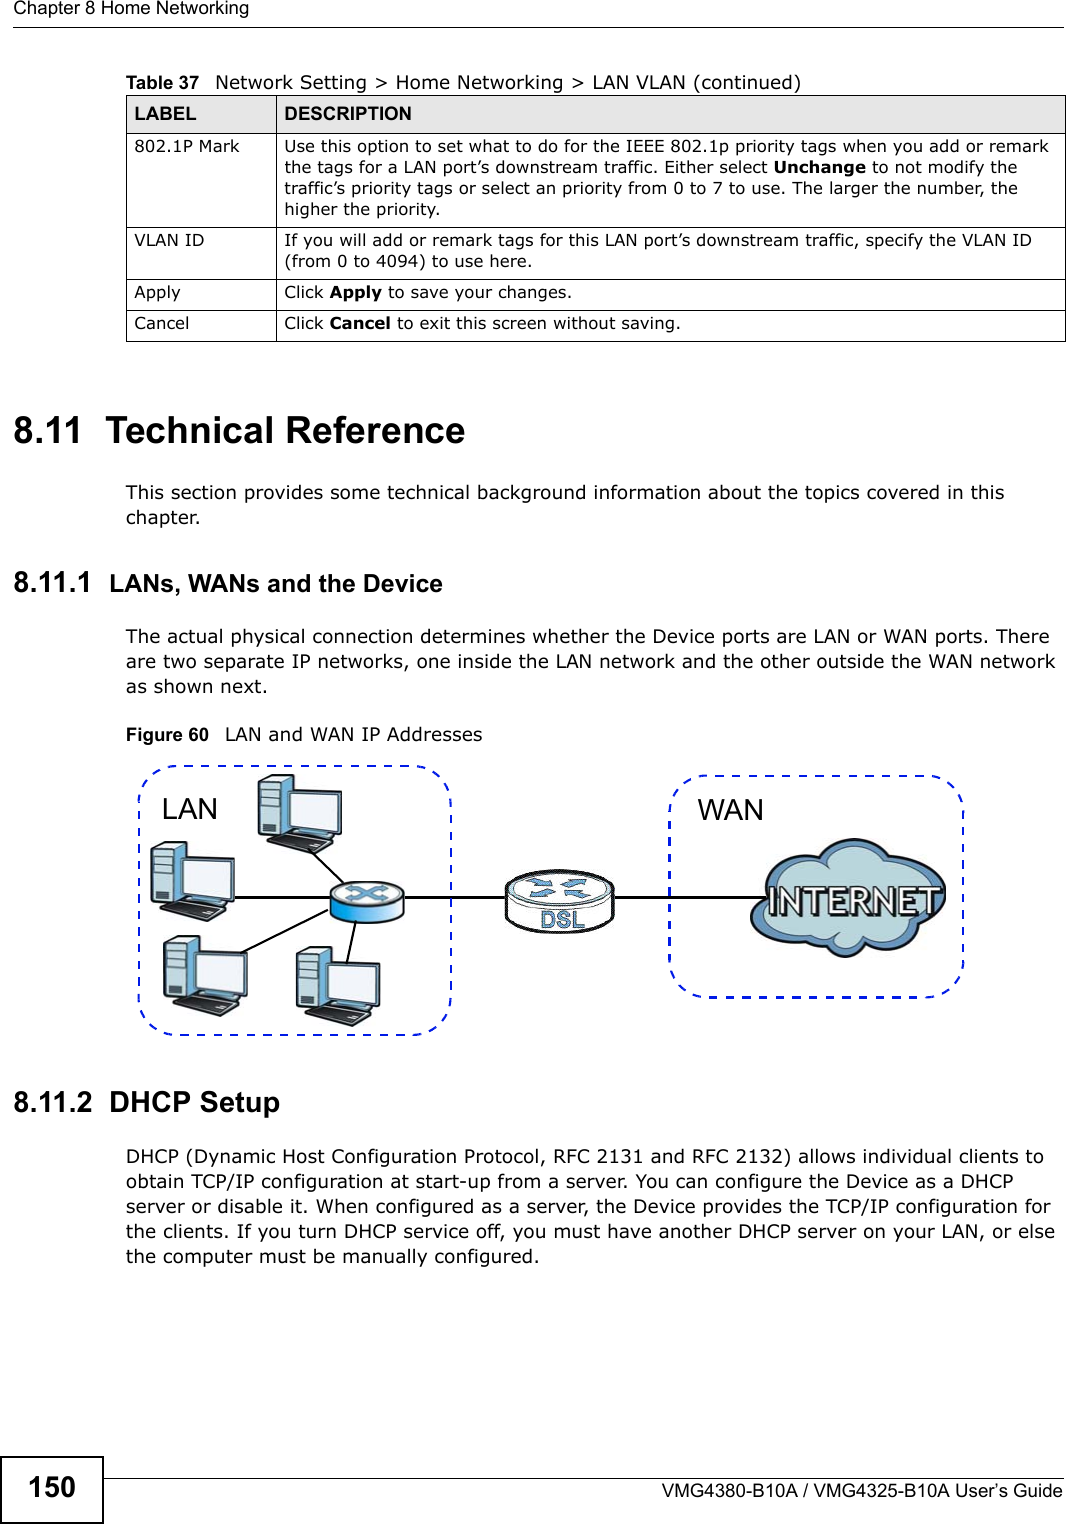 Chapter 8 Home NetworkingVMG4380-B10A / VMG4325-B10A User’s Guide1508.11  Technical ReferenceThis section provides some technical background information about the topics covered in this chapter.8.11.1  LANs, WANs and the DeviceThe actual physical connection determines whether the Device ports are LAN or WAN ports. There are two separate IP networks, one inside the LAN network and the other outside the WAN network as shown next.Figure 60   LAN and WAN IP Addresses8.11.2  DHCP SetupDHCP (Dynamic Host Configuration Protocol, RFC 2131 and RFC 2132) allows individual clients to obtain TCP/IP configuration at start-up from a server. You can configure the Device as a DHCP server or disable it. When configured as a server, the Device provides the TCP/IP configuration for the clients. If you turn DHCP service off, you must have another DHCP server on your LAN, or else the computer must be manually configured. 802.1P Mark Use this option to set what to do for the IEEE 802.1p priority tags when you add or remark the tags for a LAN port’s downstream traffic. Either select Unchange to not modify the traffic’s priority tags or select an priority from 0 to 7 to use. The larger the number, the higher the priority.VLAN ID If you will add or remark tags for this LAN port’s downstream traffic, specify the VLAN ID(from 0 to 4094) to use here.Apply Click Apply to save your changes.Cancel Click Cancel to exit this screen without saving.Table 37   Network Setting &gt; Home Networking &gt; LAN VLAN (continued)LABEL DESCRIPTIONWANLAN